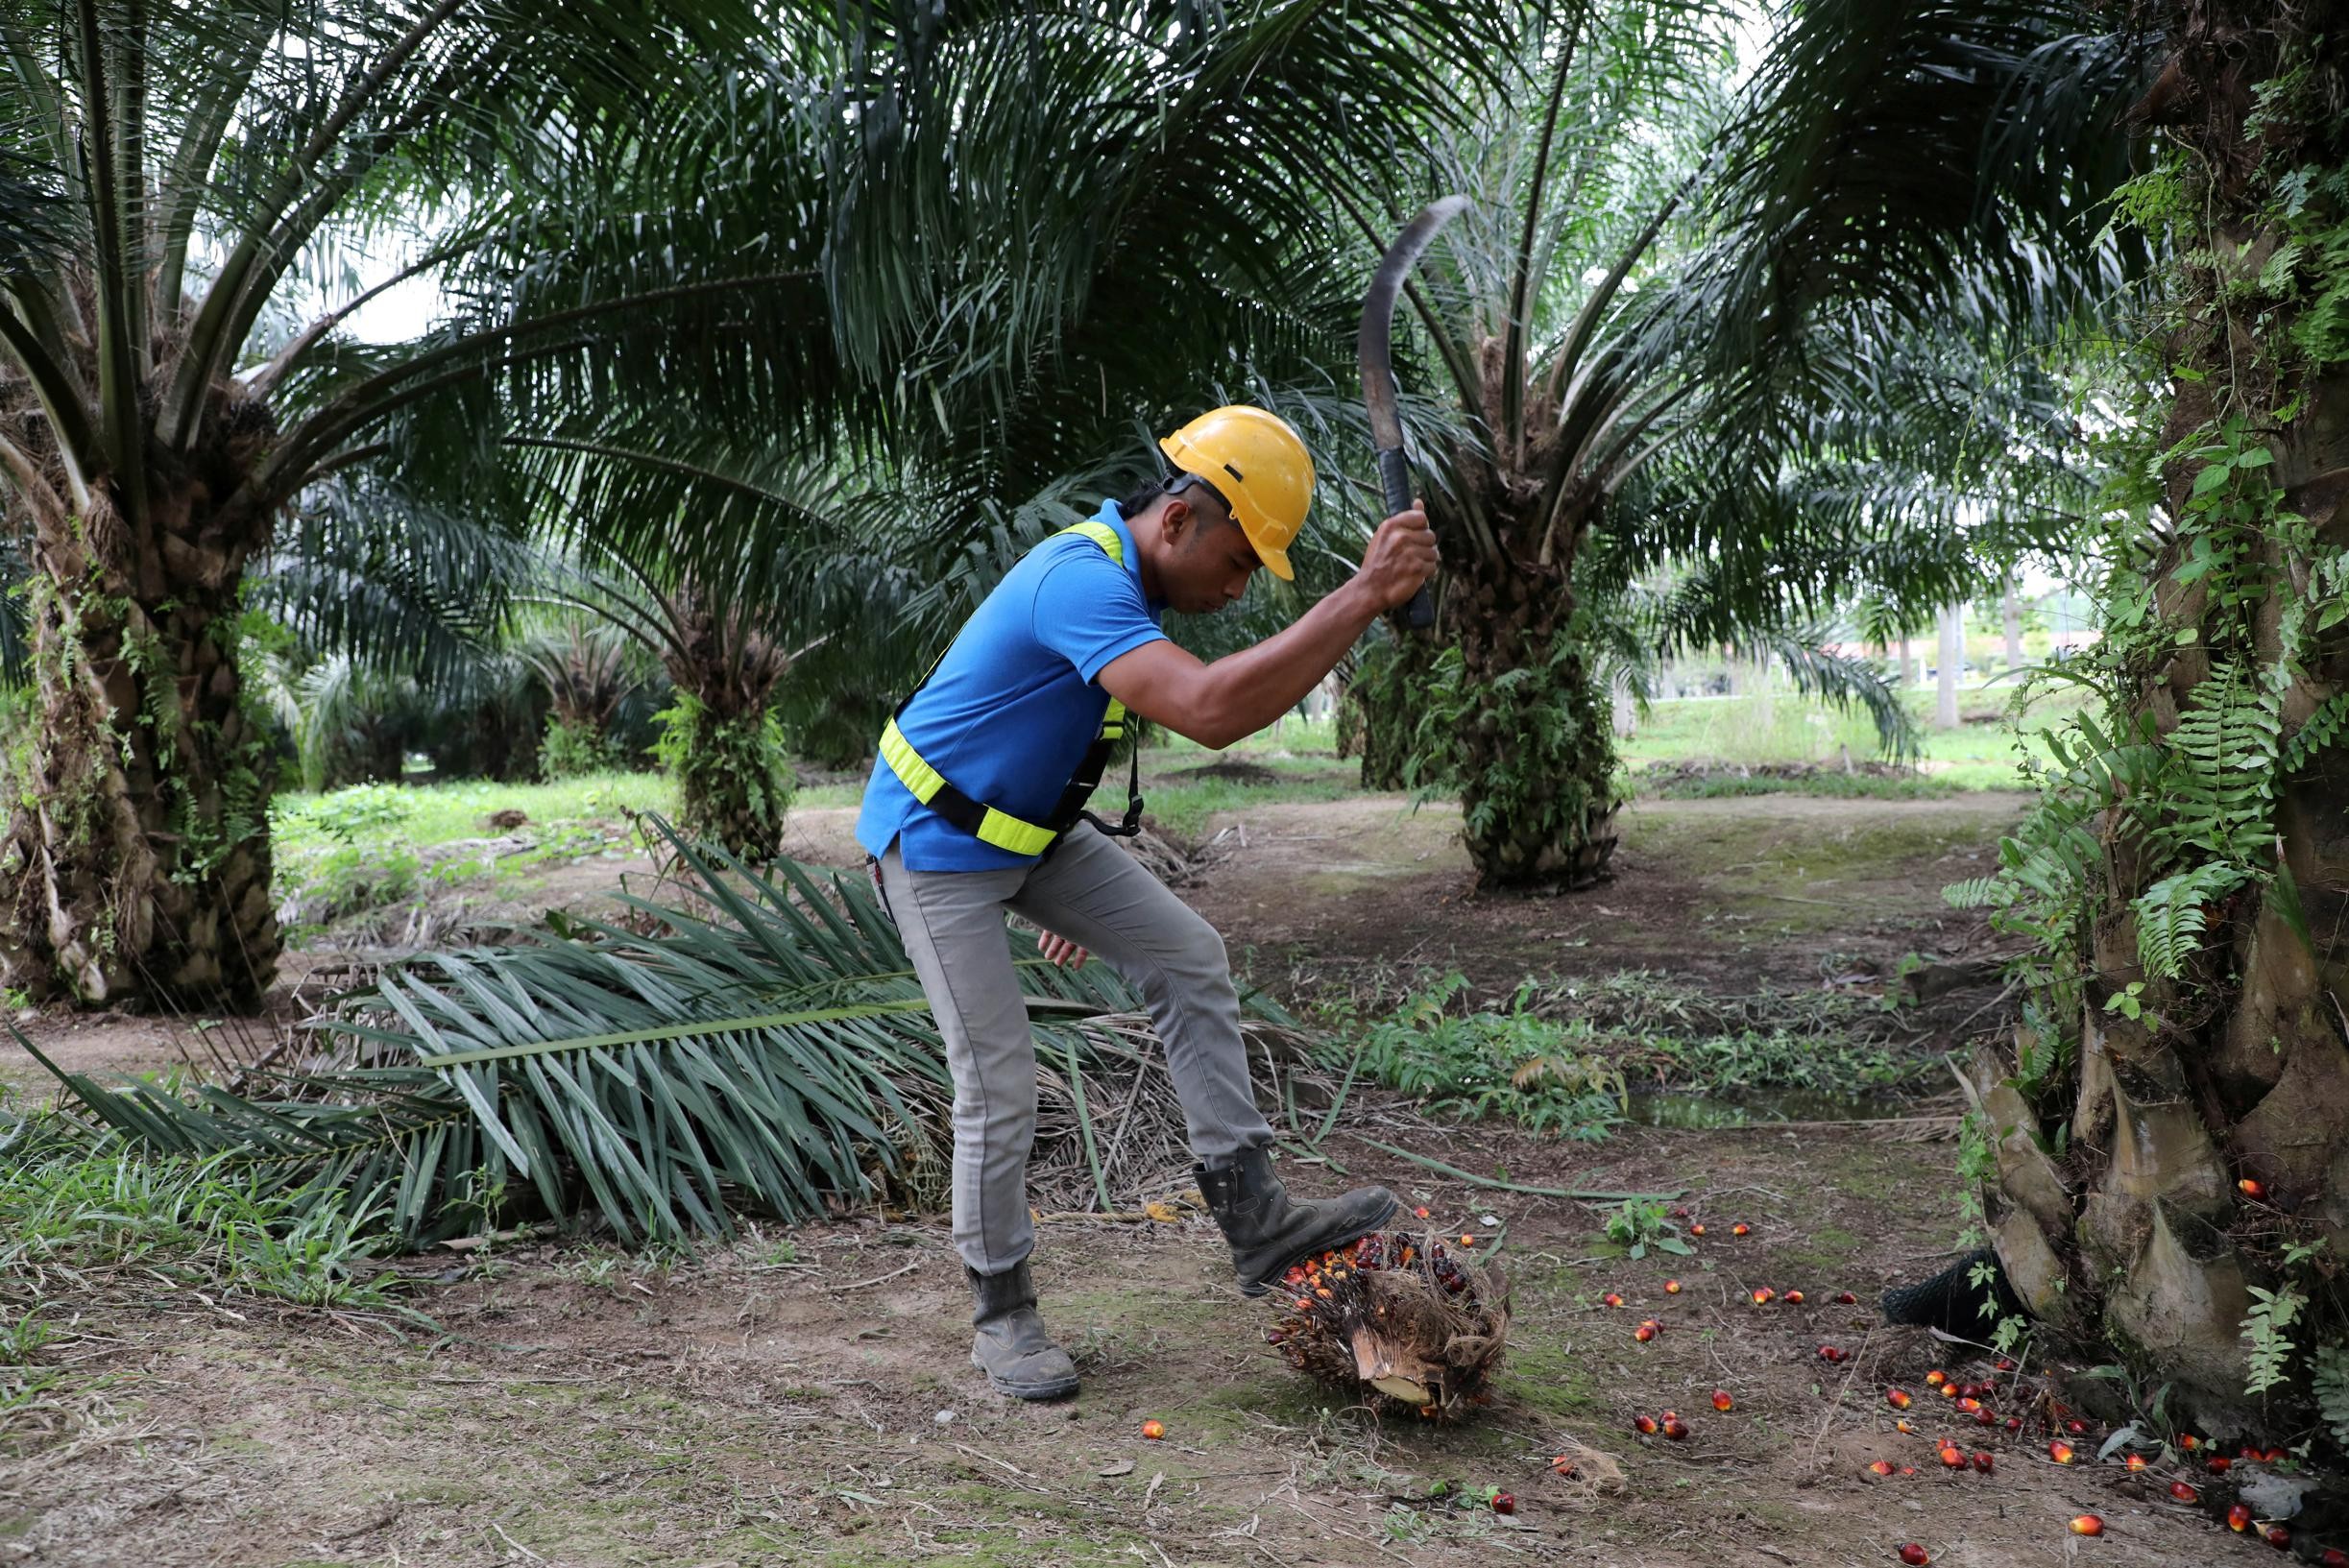 Indonesia bans palm oil exports, prices rise worldwide